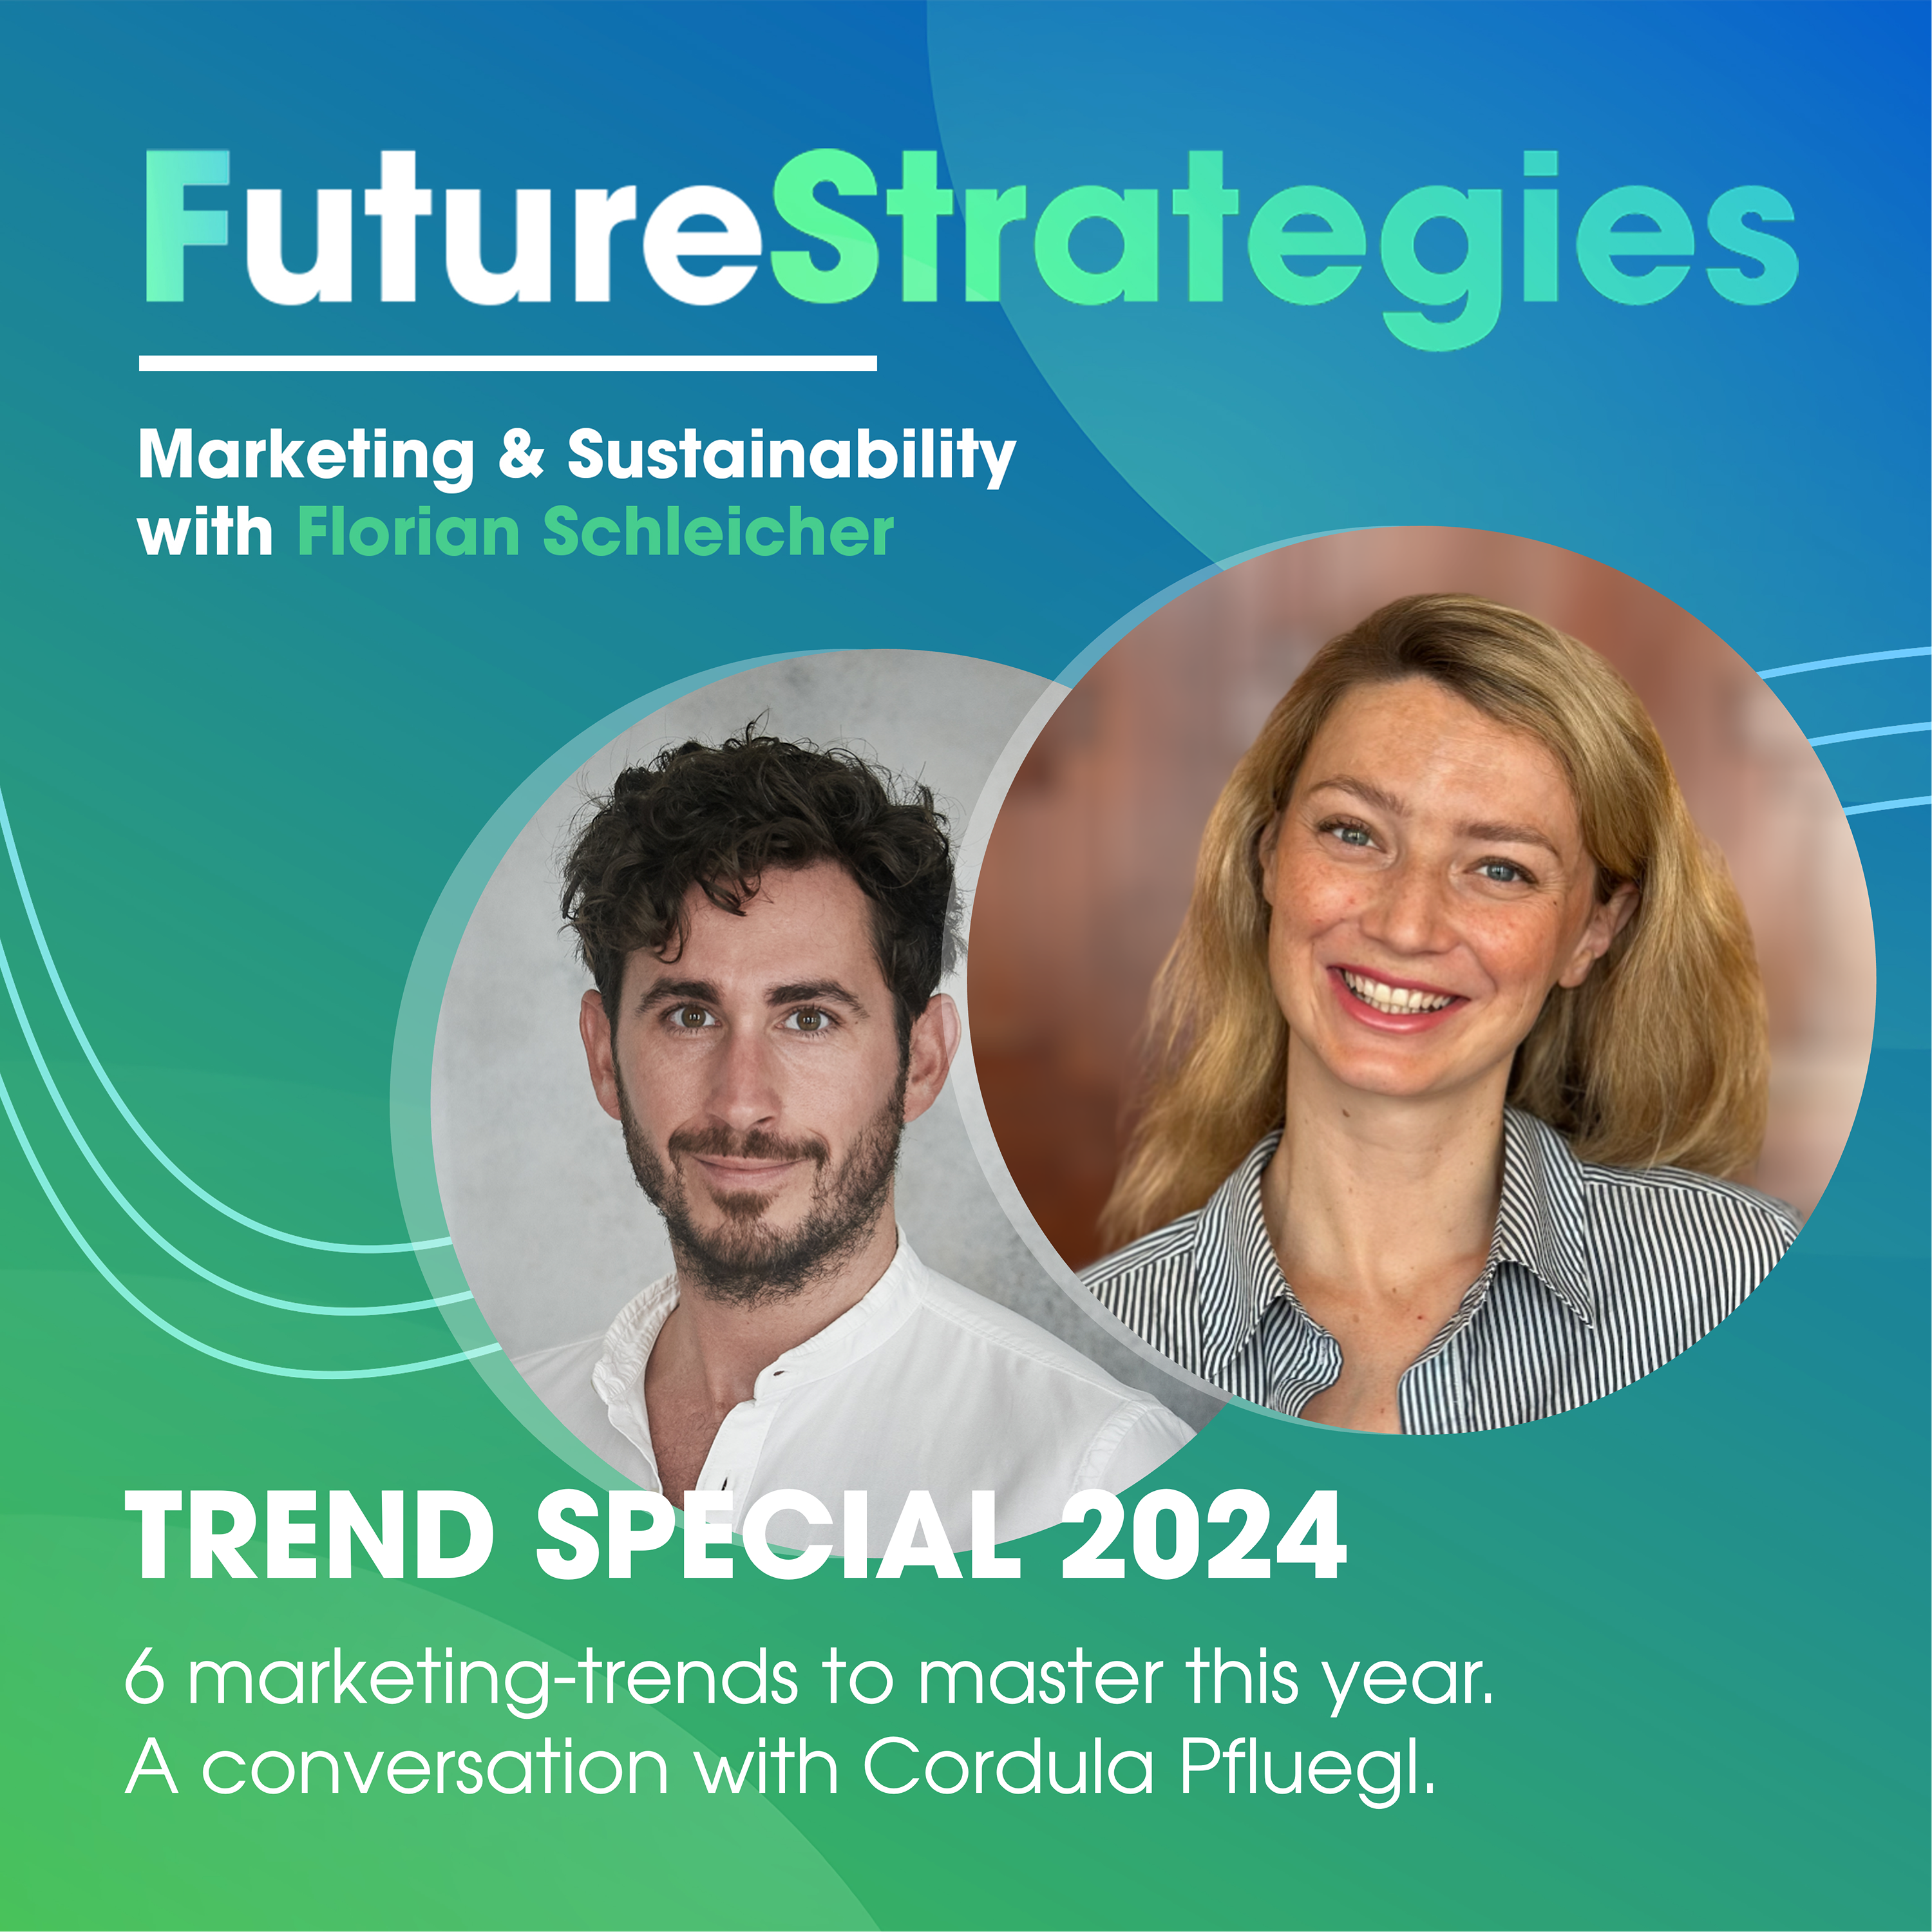 ✨ Trend Special 2024 - Which trends will affect and drive marketing? A conversation with Cordula Pfluegl